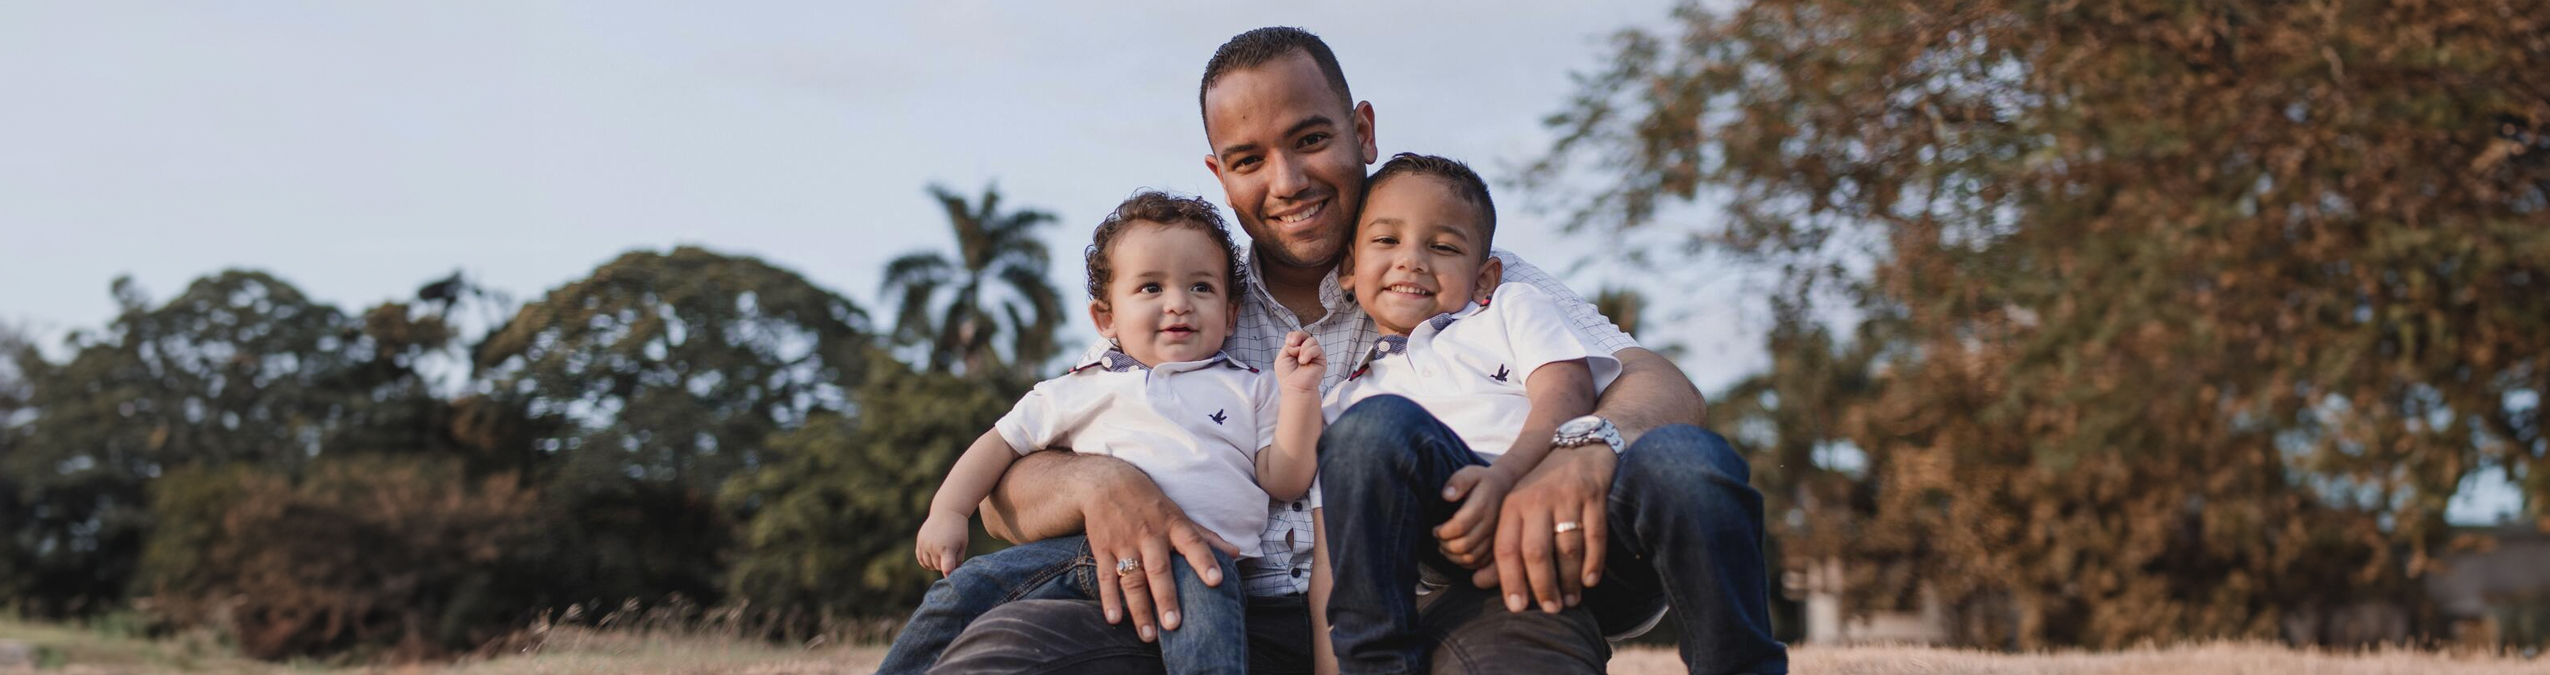 Man with two young children sitting in his lap